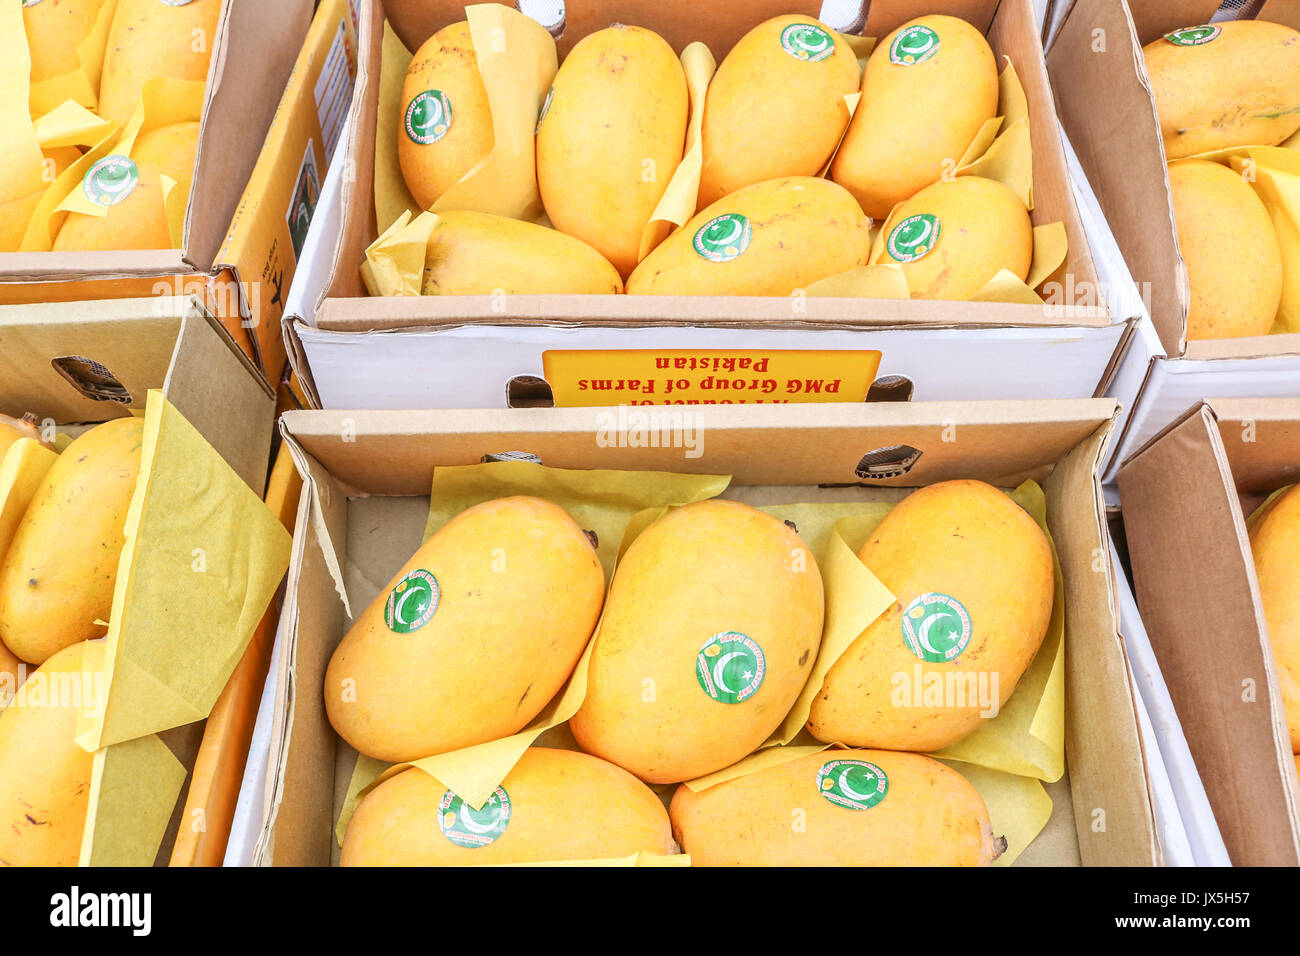 London, UK. 15th August 2017. Stickers on imported mangoes from Pakistan with Happy Independence day as  The Indian and Pakistan community in Southall West London prepare to commemorate  the 70th anniversary of India and Pakistan independence from colonial Britain in 1947 Credit: amer ghazzal/Alamy Live News Stock Photo